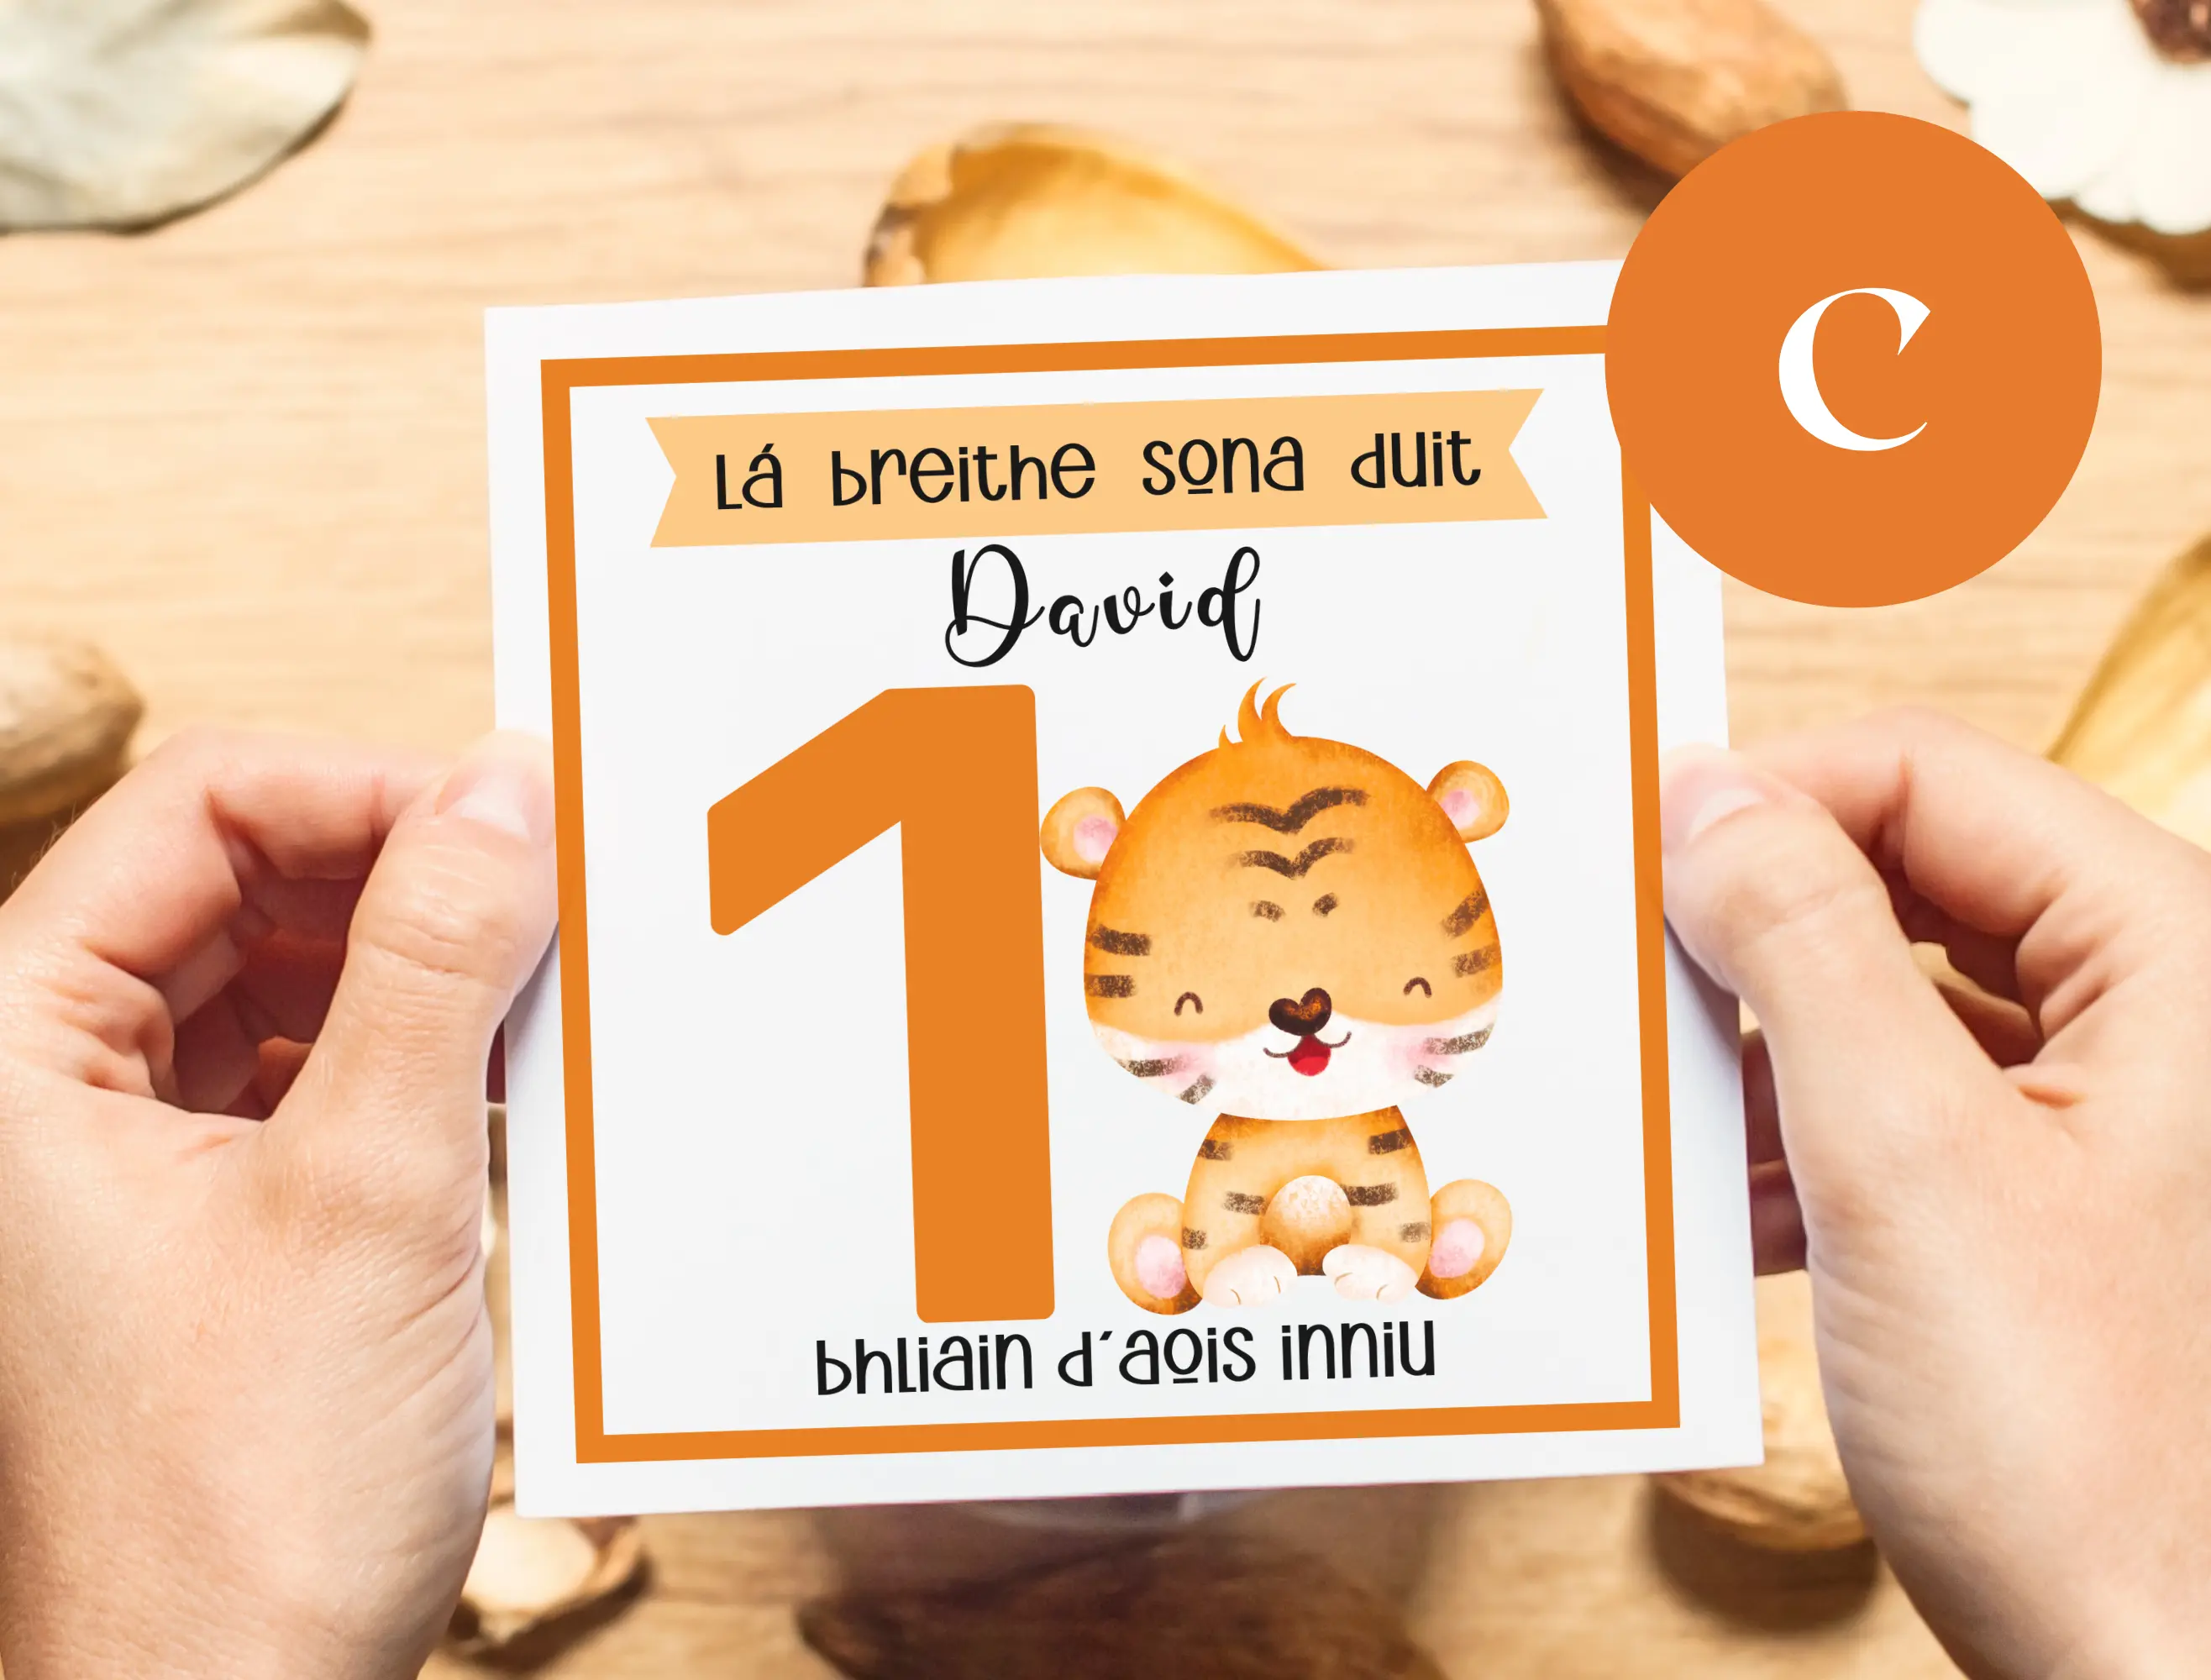 Personalised 1st birthday card cute lion or tiger